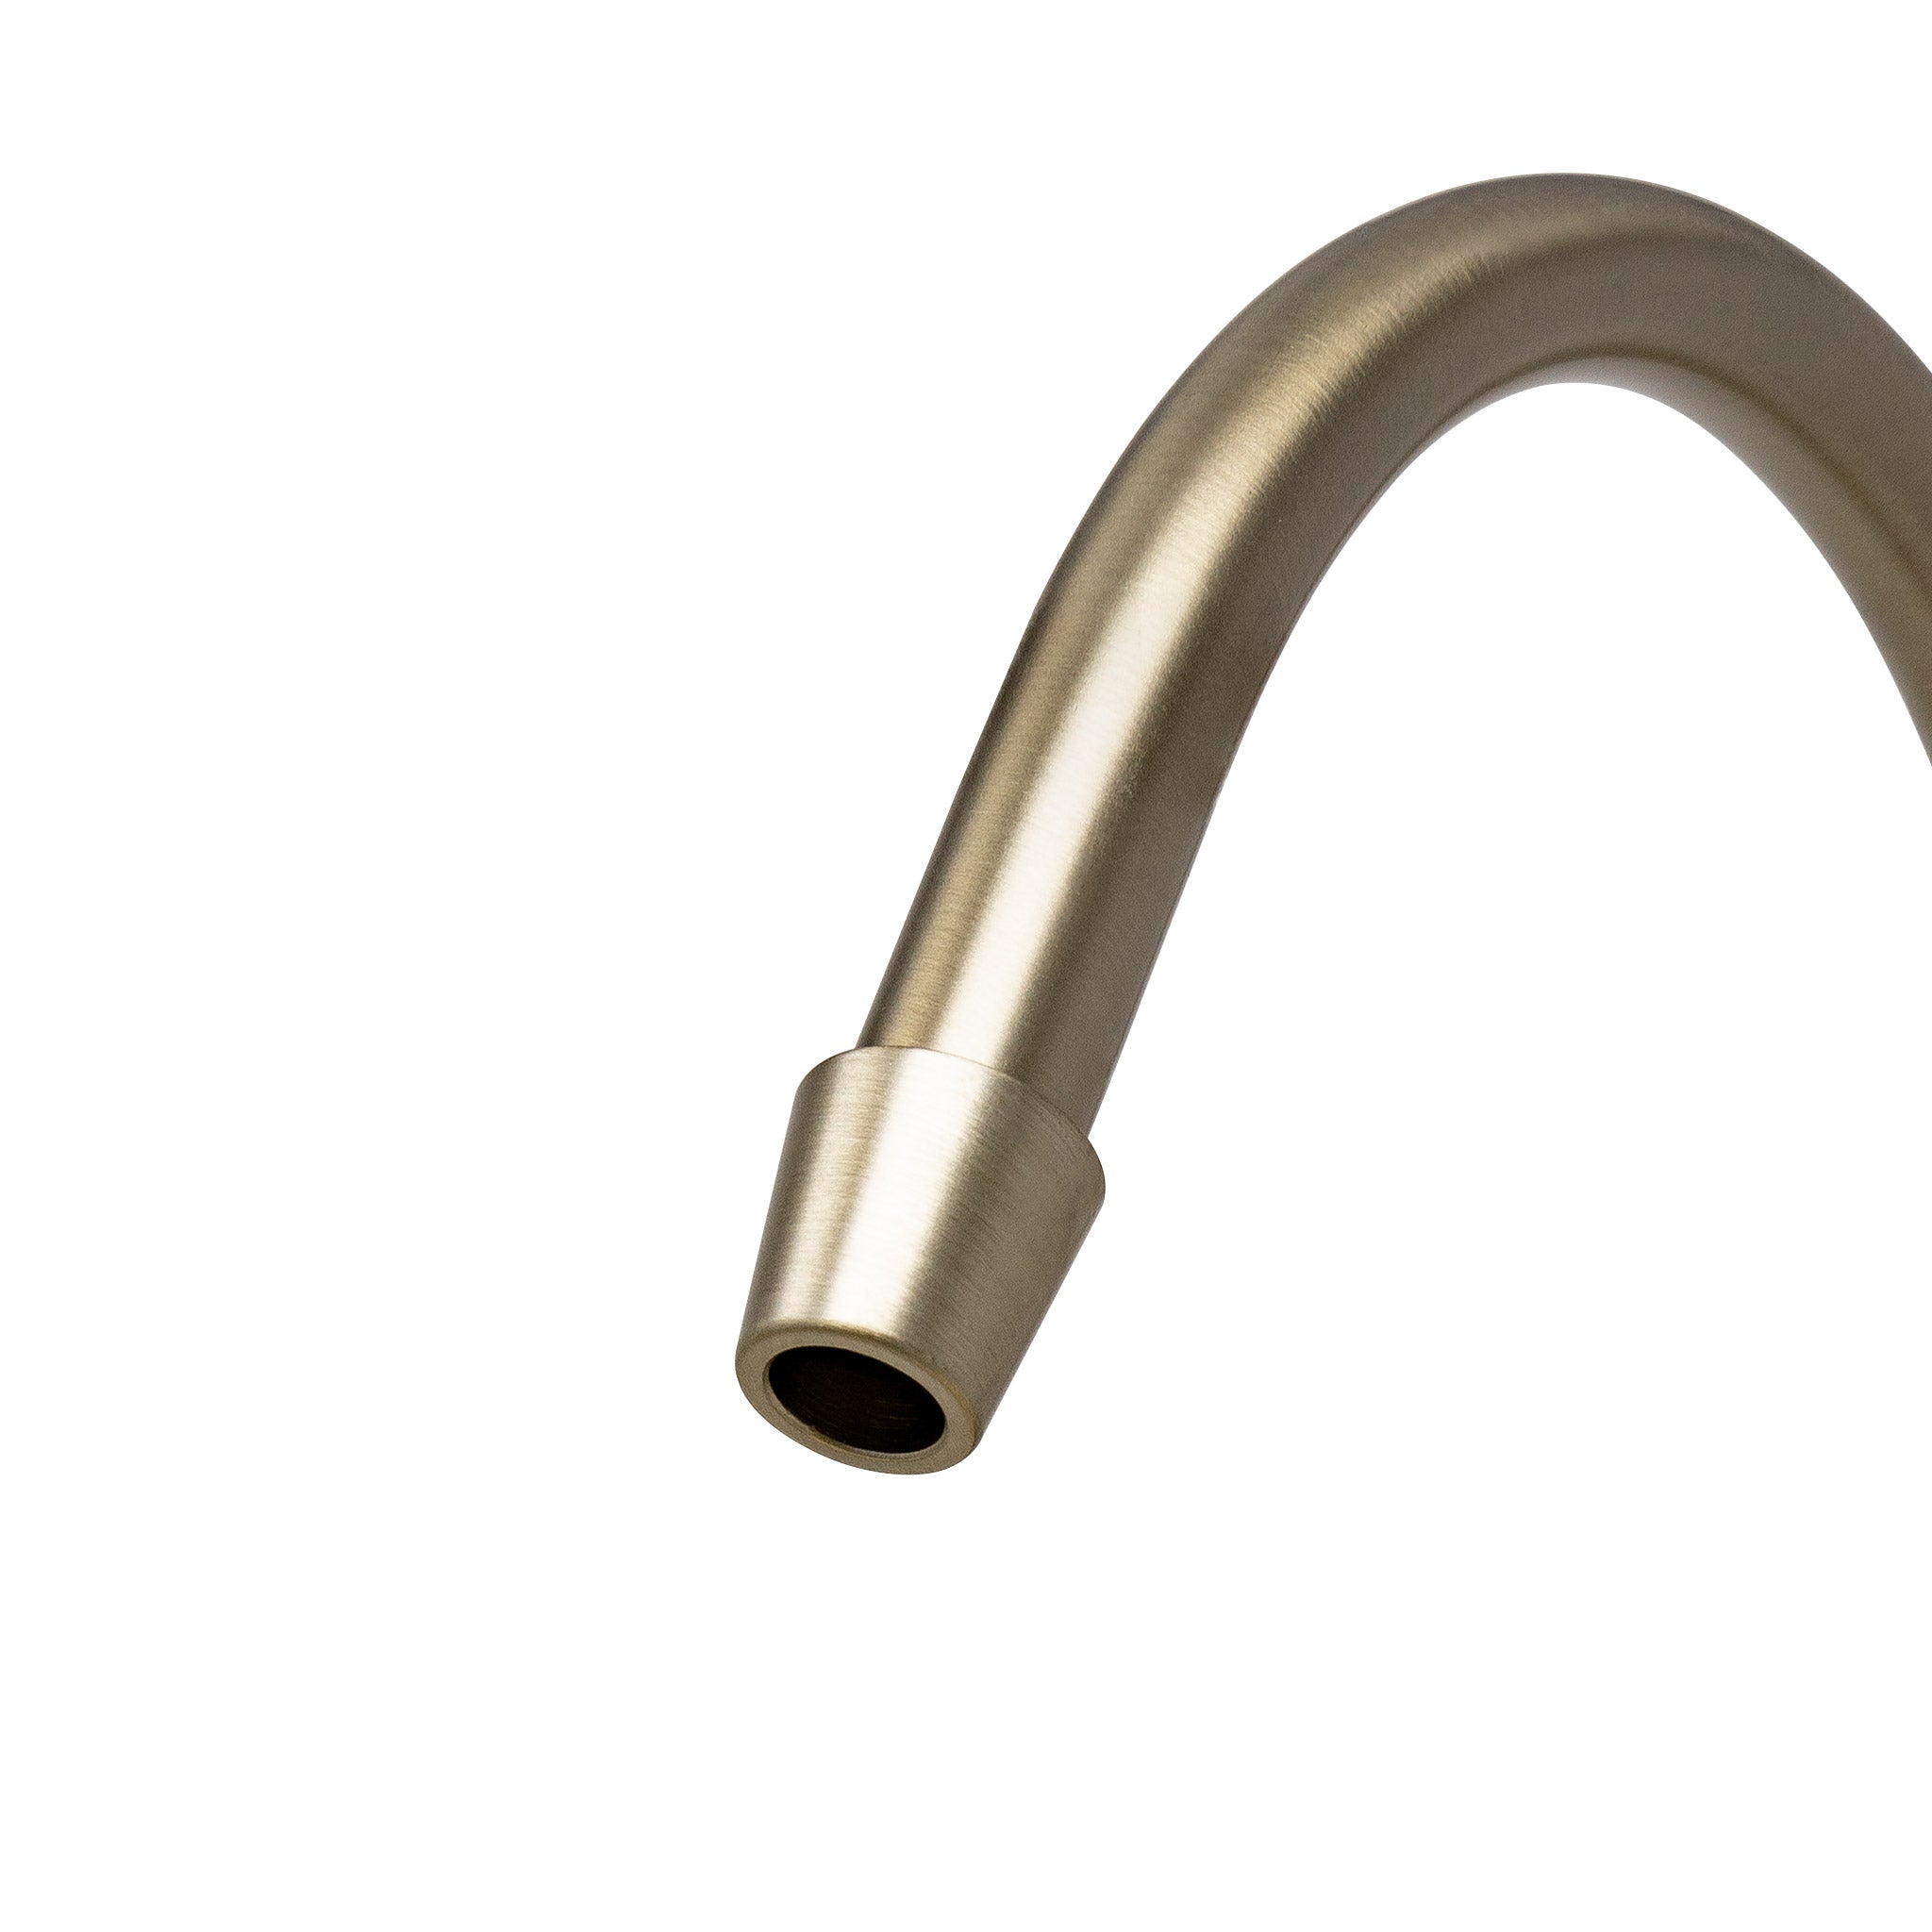 Water Filtration Faucet Vase Style Champagne Gold Reverse Osmosis Non Air Gap. Certified by NSF.